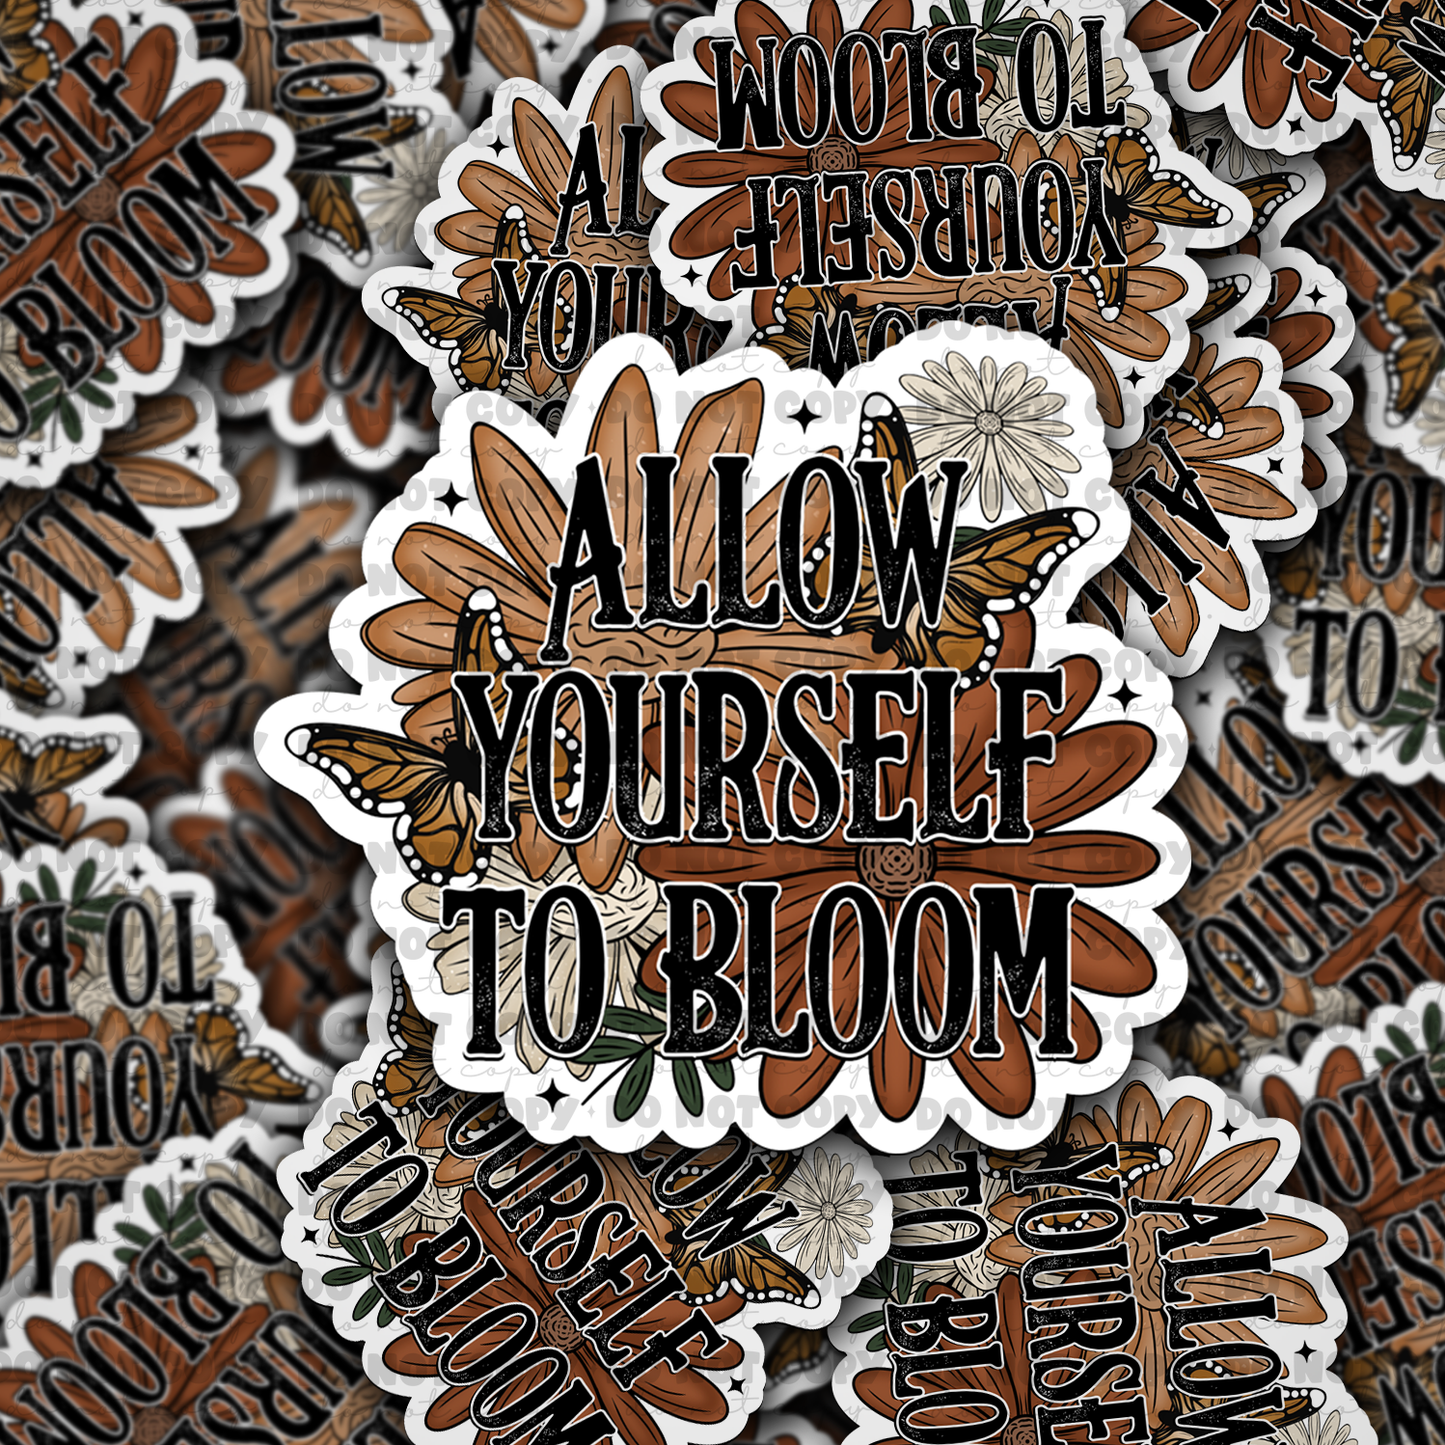 DC 773 Allow yourself to bloom Die cut sticker 3-5 Business Day TAT